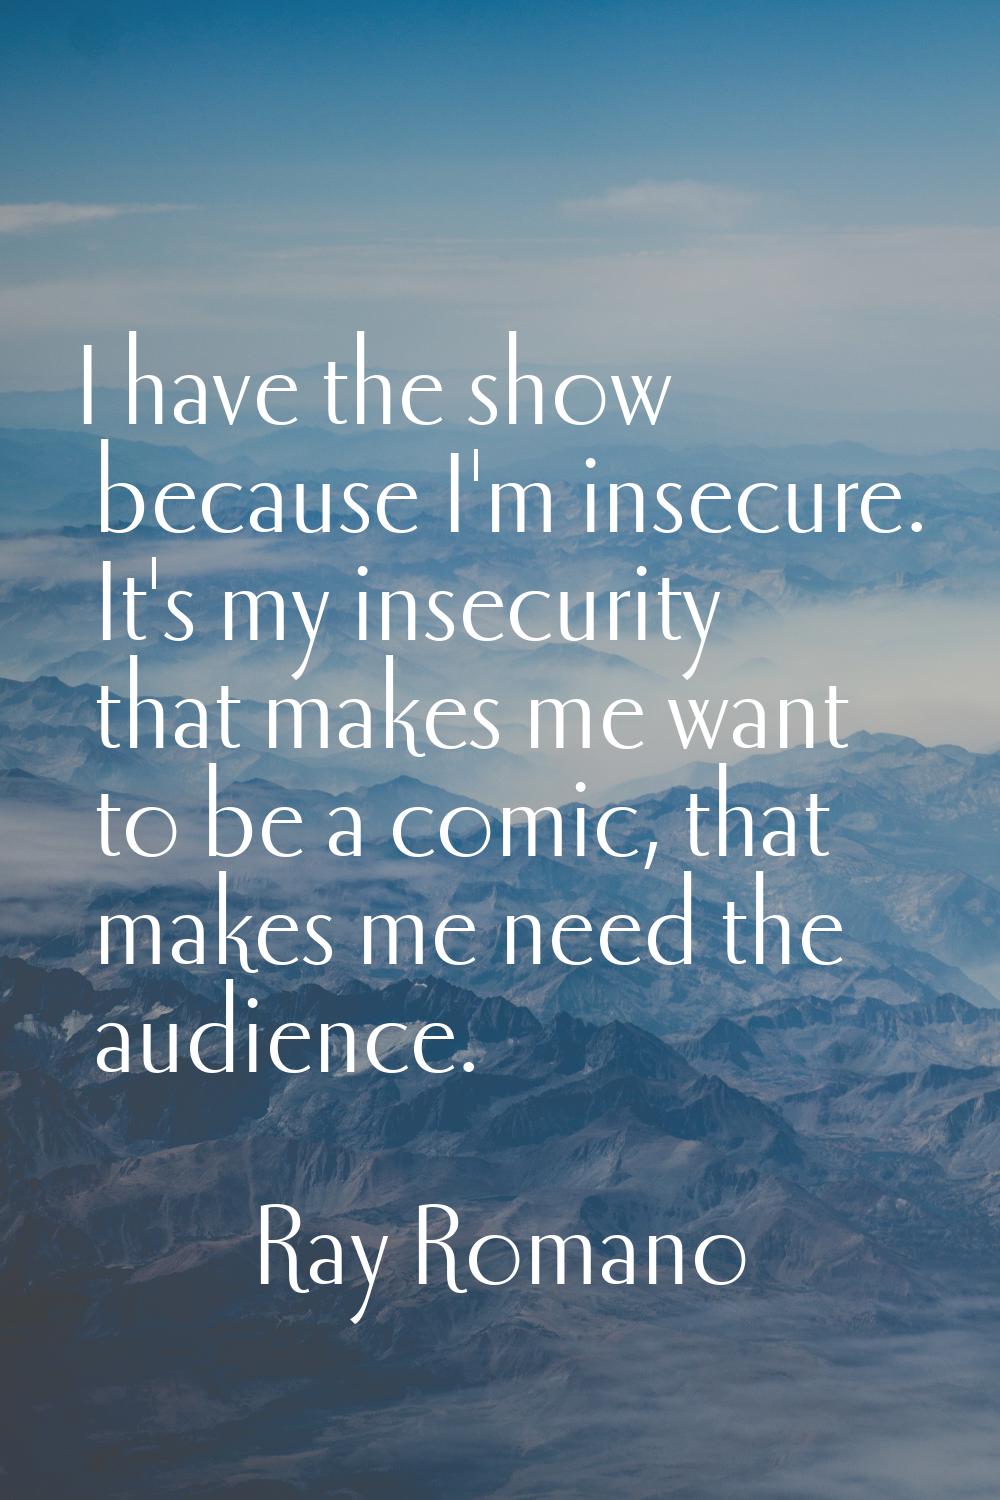 I have the show because I'm insecure. It's my insecurity that makes me want to be a comic, that mak